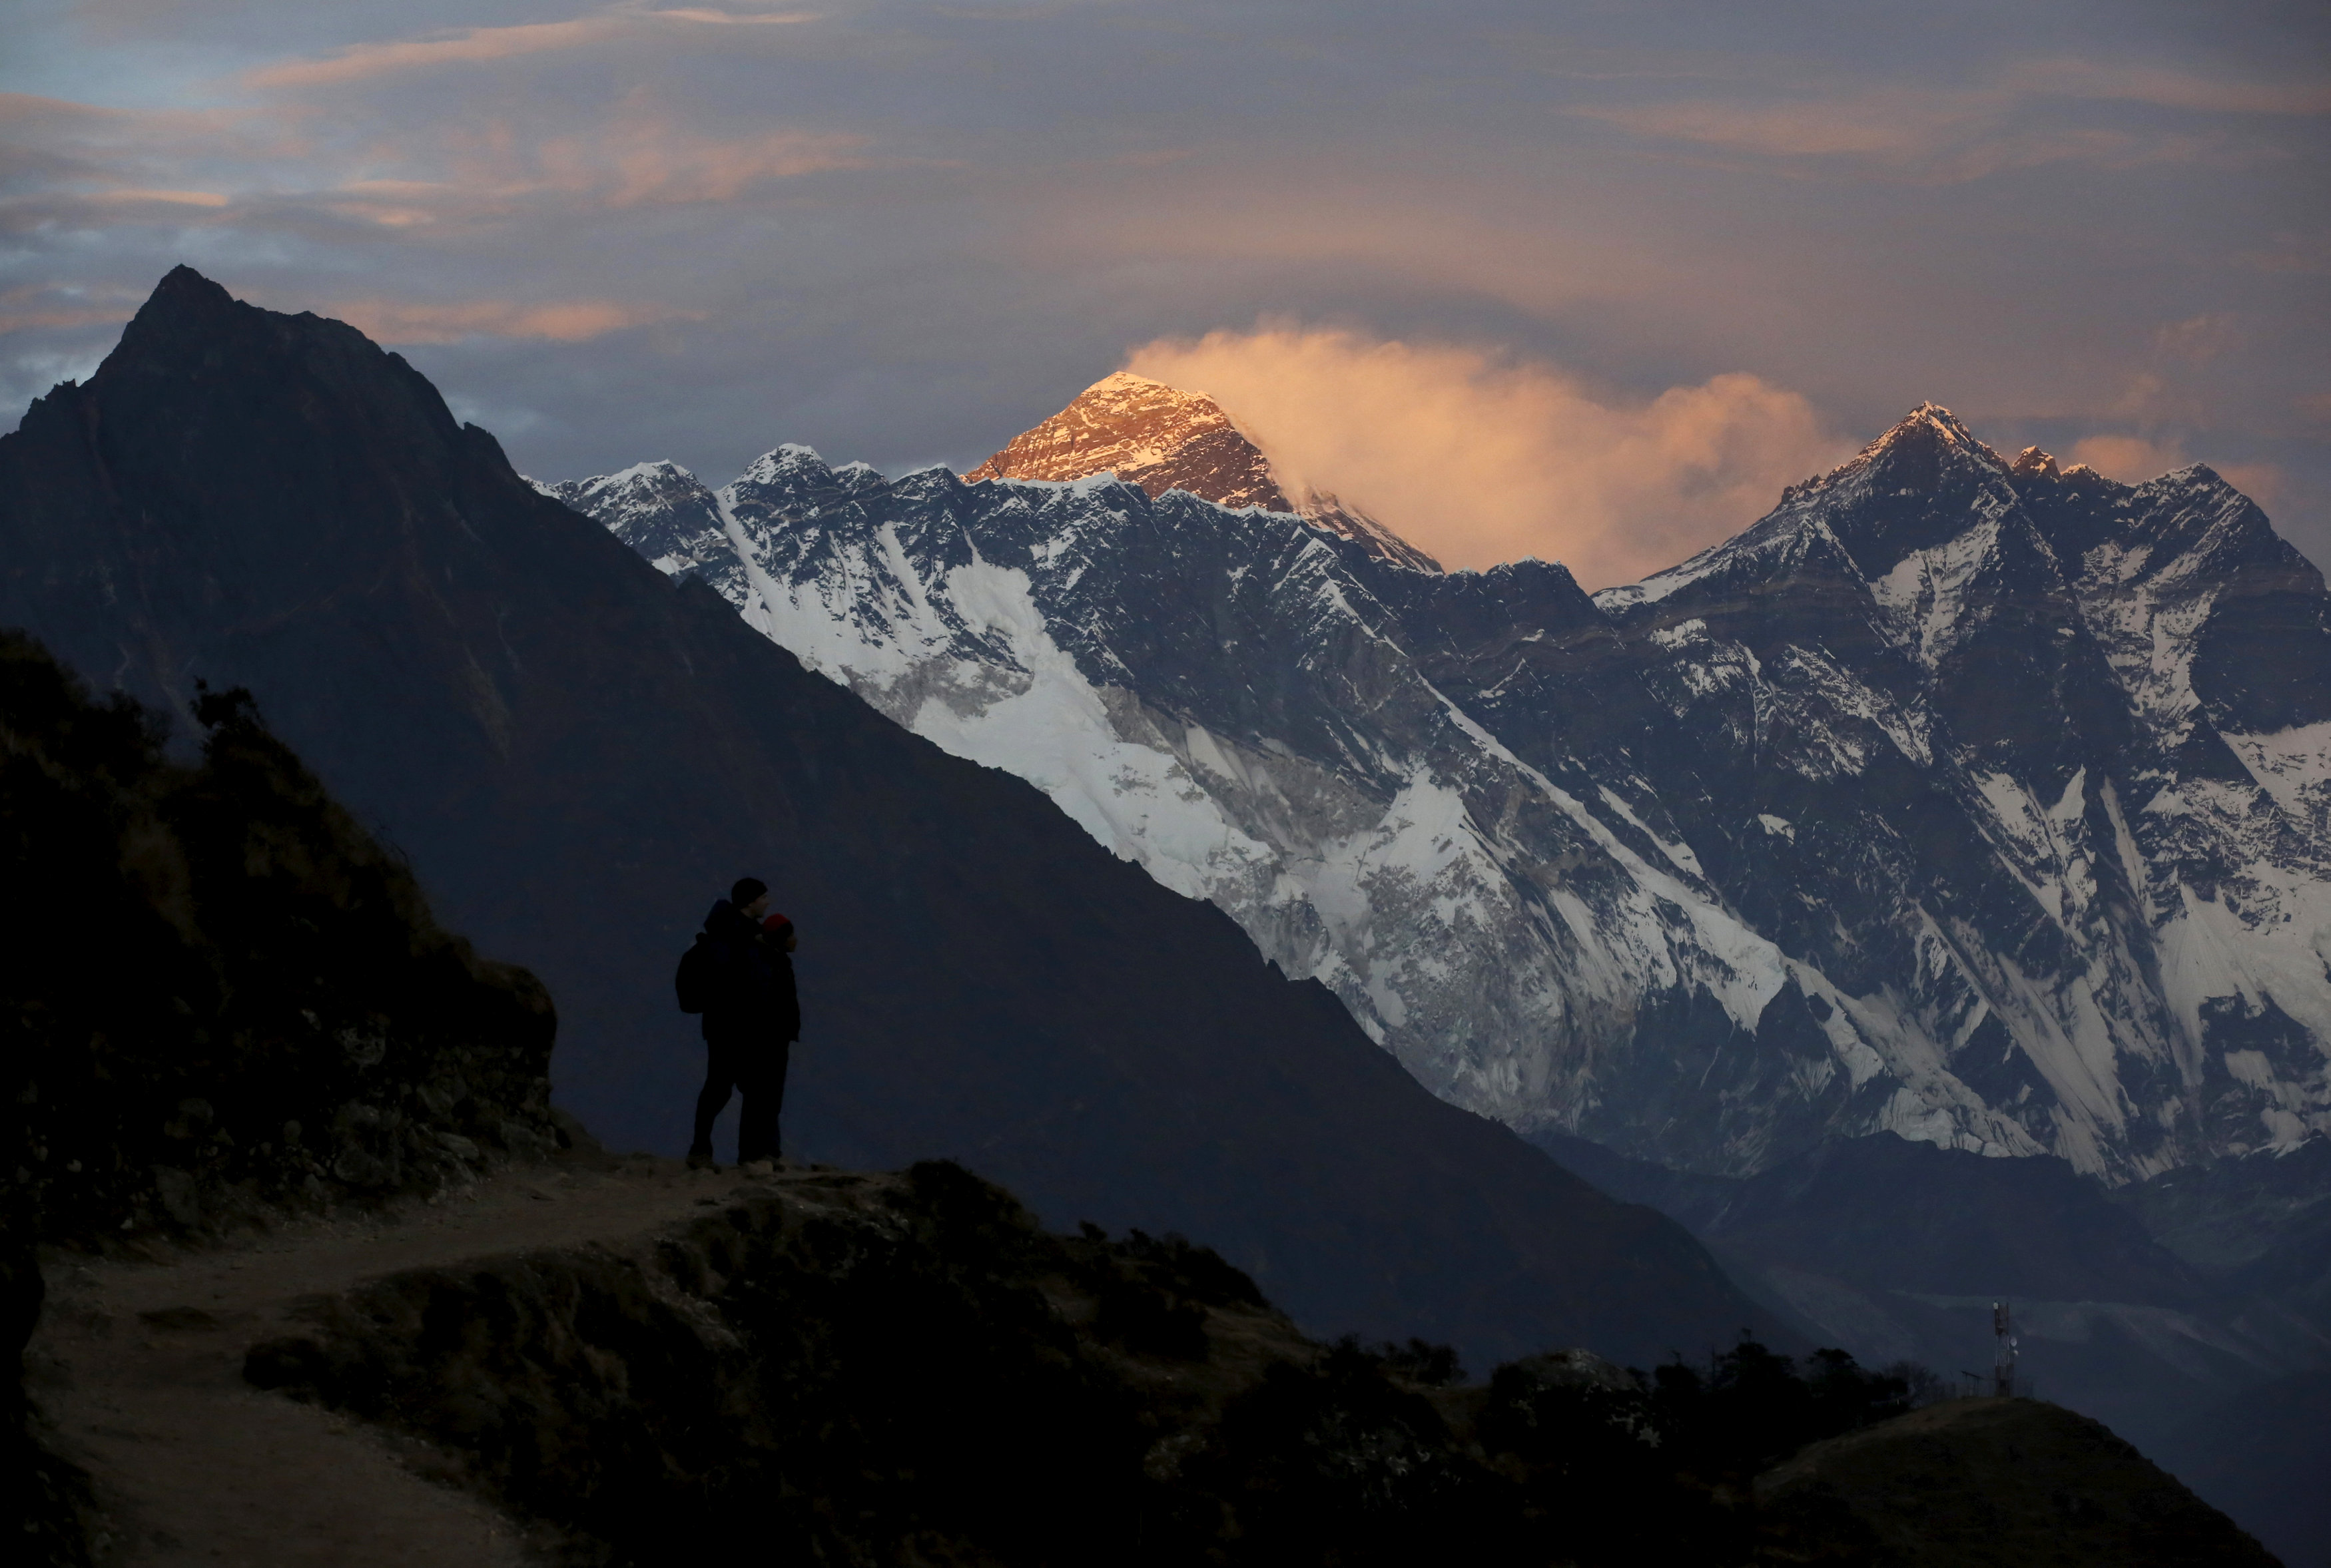 445 climbers reach Mount Everest this spring: Nepal